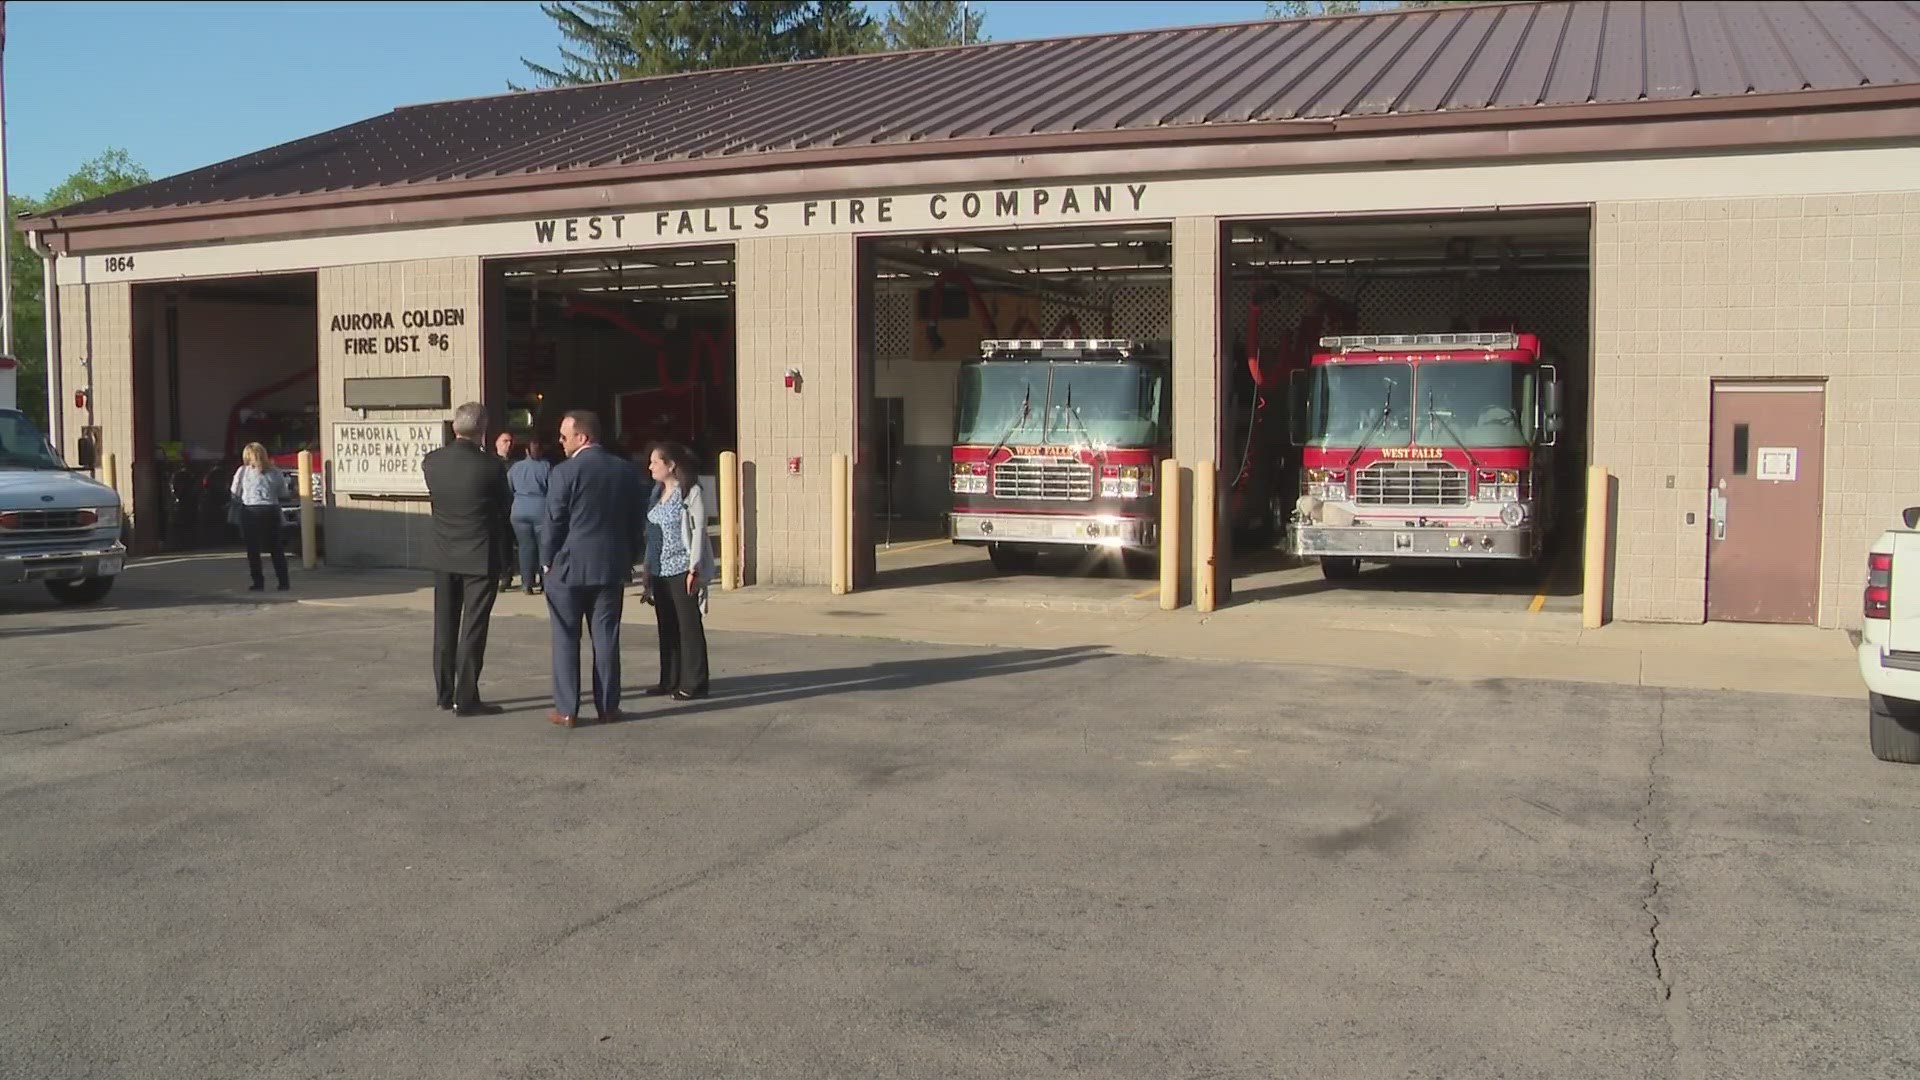 Scott Bieler foundation delivers special gifts to West Falls Volunteer Fire Company